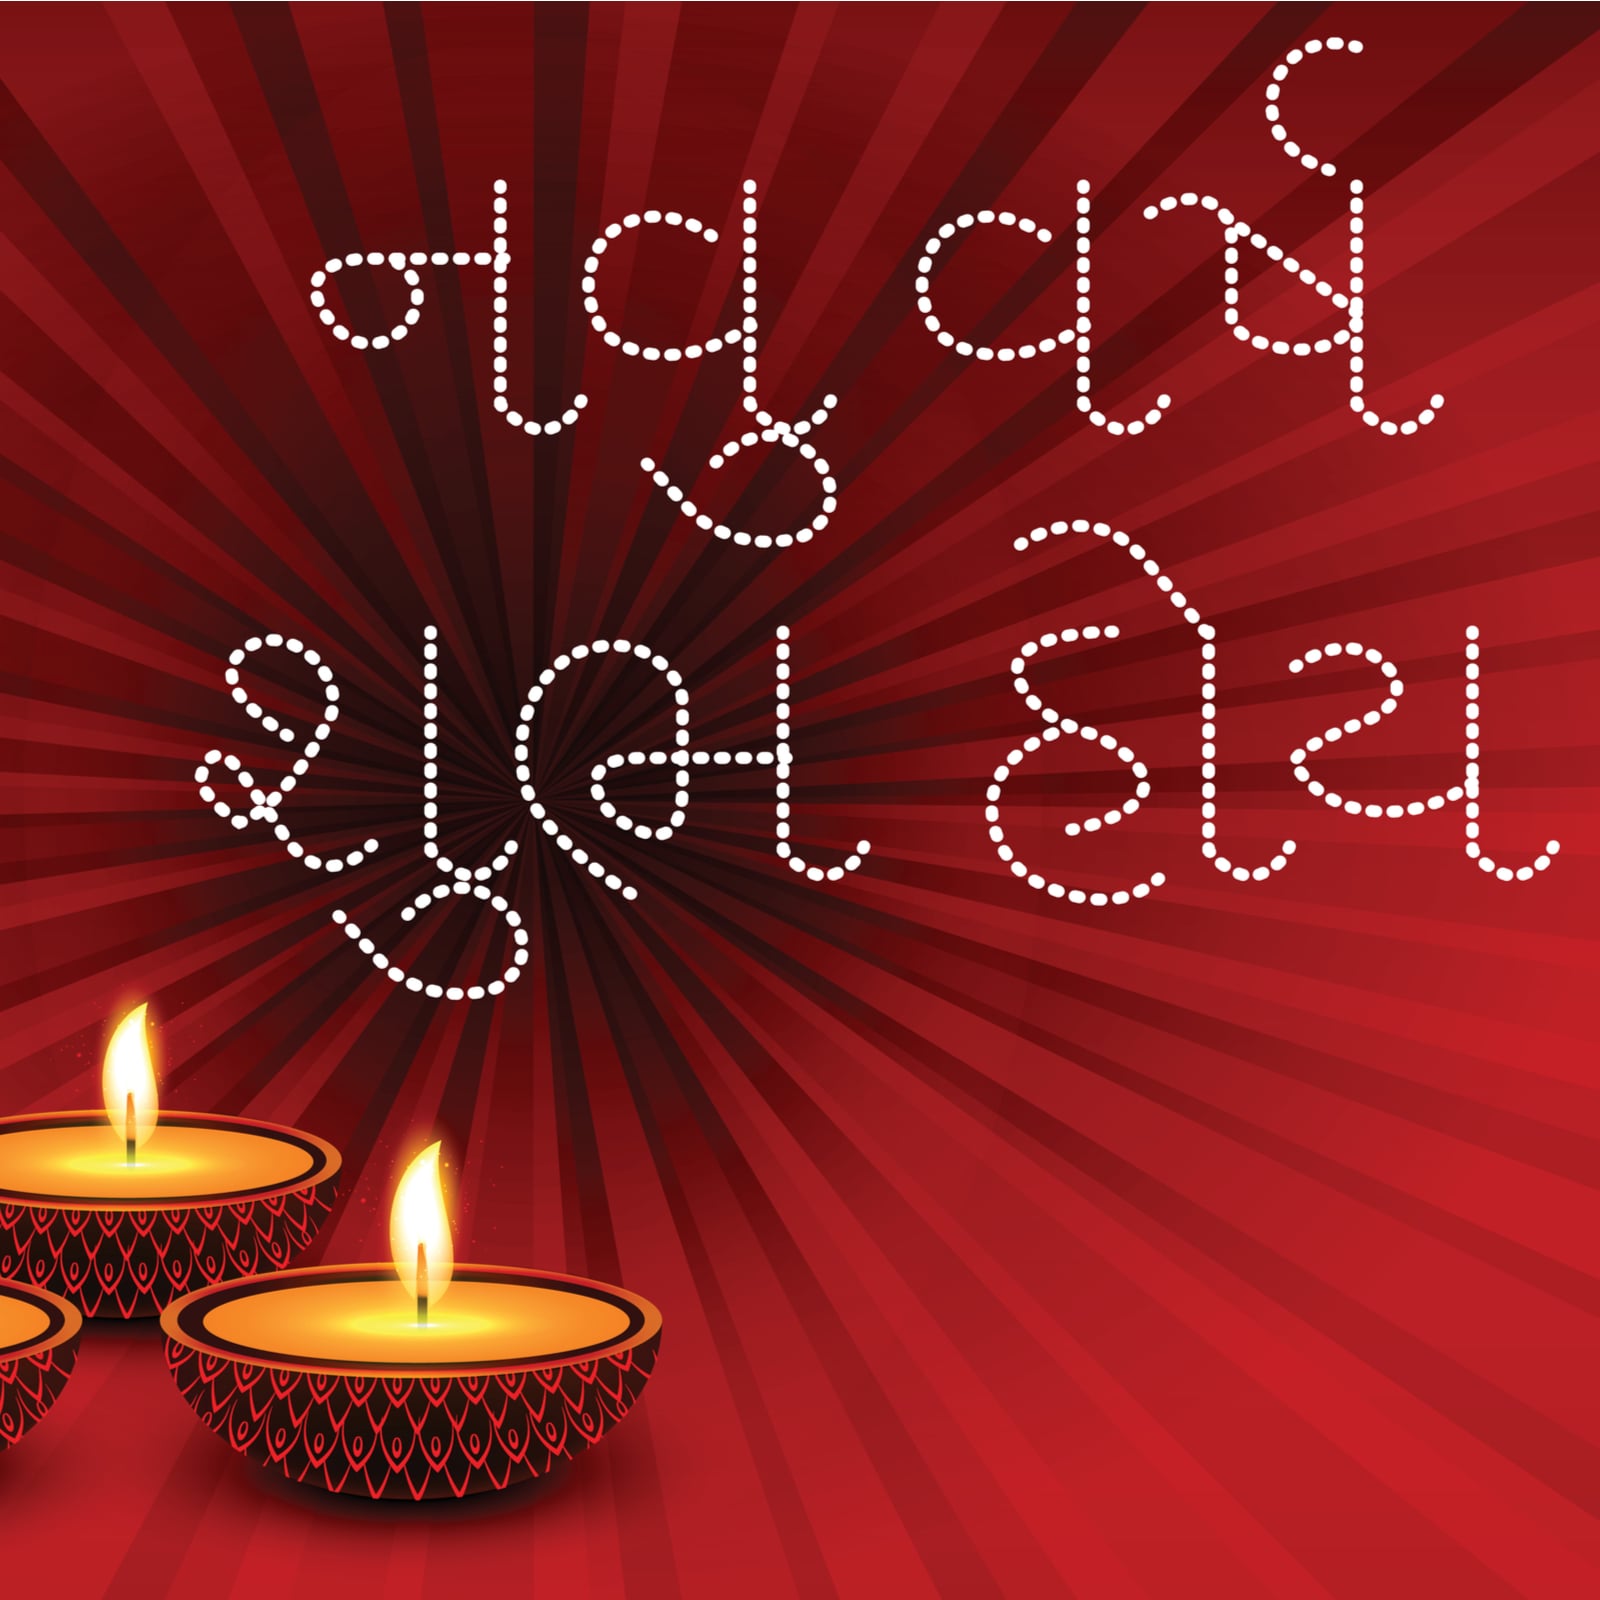 Happy Gujarati New Year 2021: Wishes Images, Quotes, Photos, Pics, Facebook SMS & Messages.  (Image: Shutterstock)